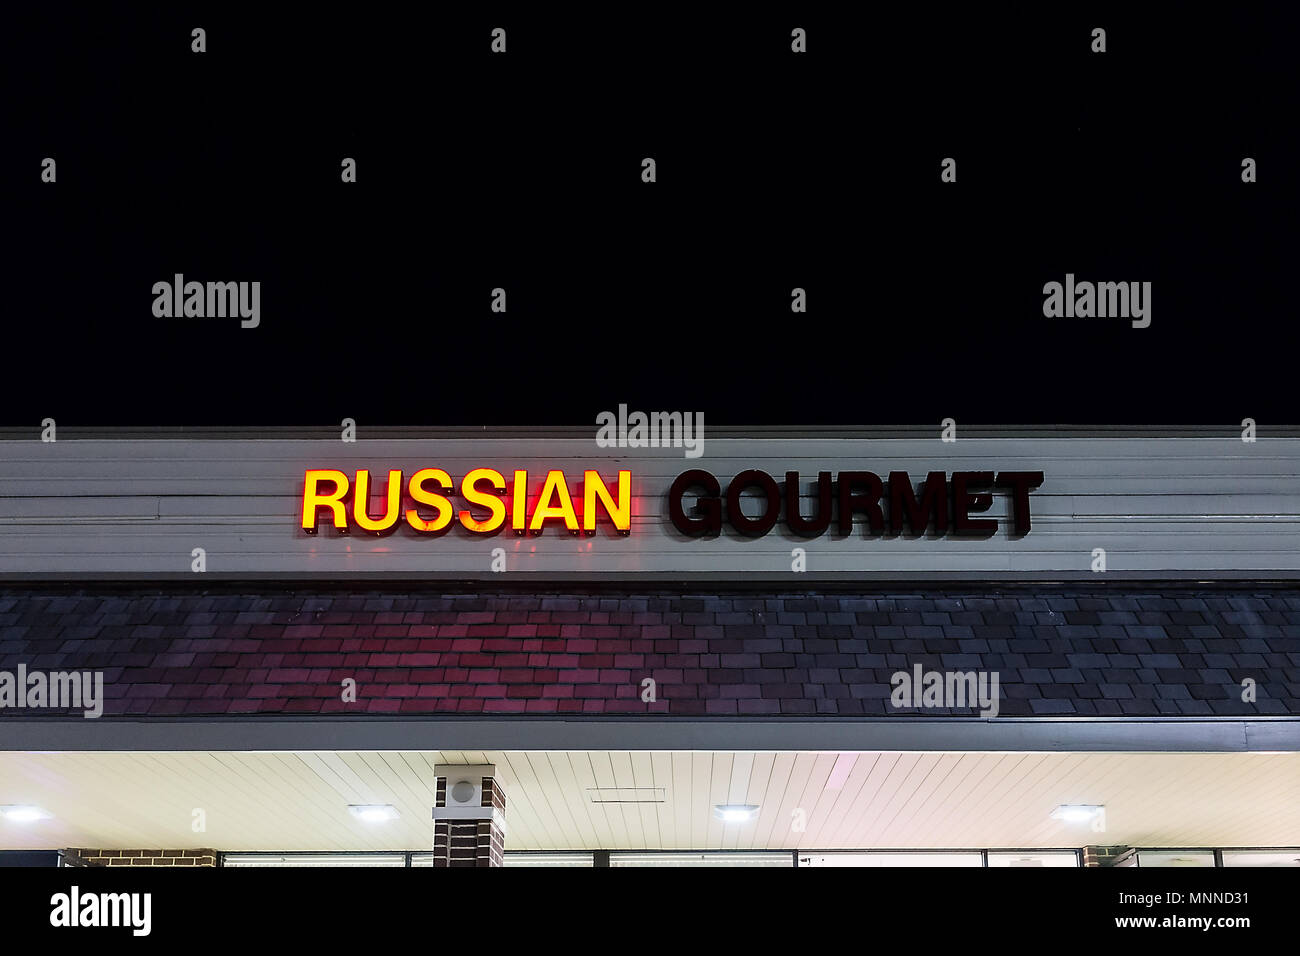 Herndon, USA - March 8, 2018: Russian Gourmet eastern european goods food specialty store with produce and restaurant in Virginia at night with sign Stock Photo